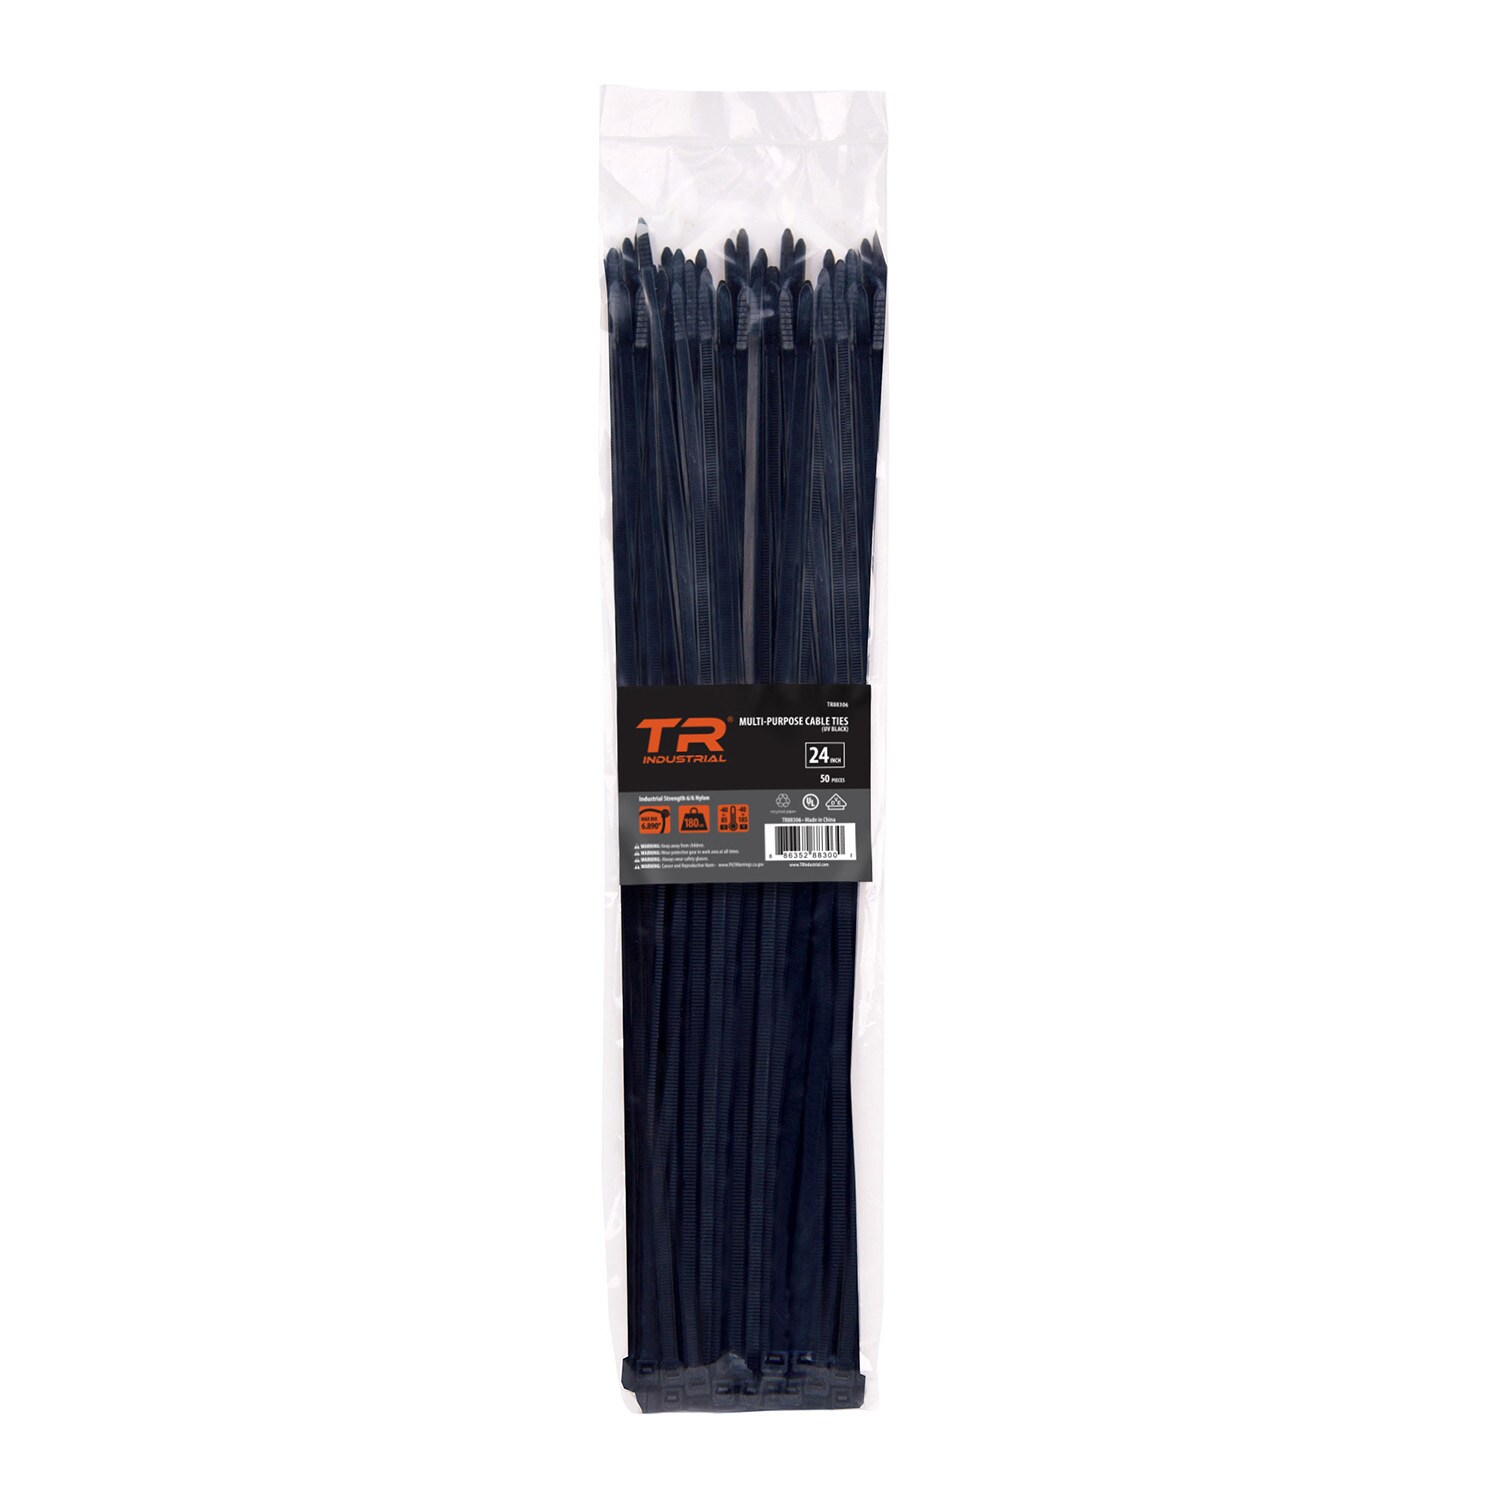 Cable Ties 7-1/2" Natural Releasable 100 Pcs. 